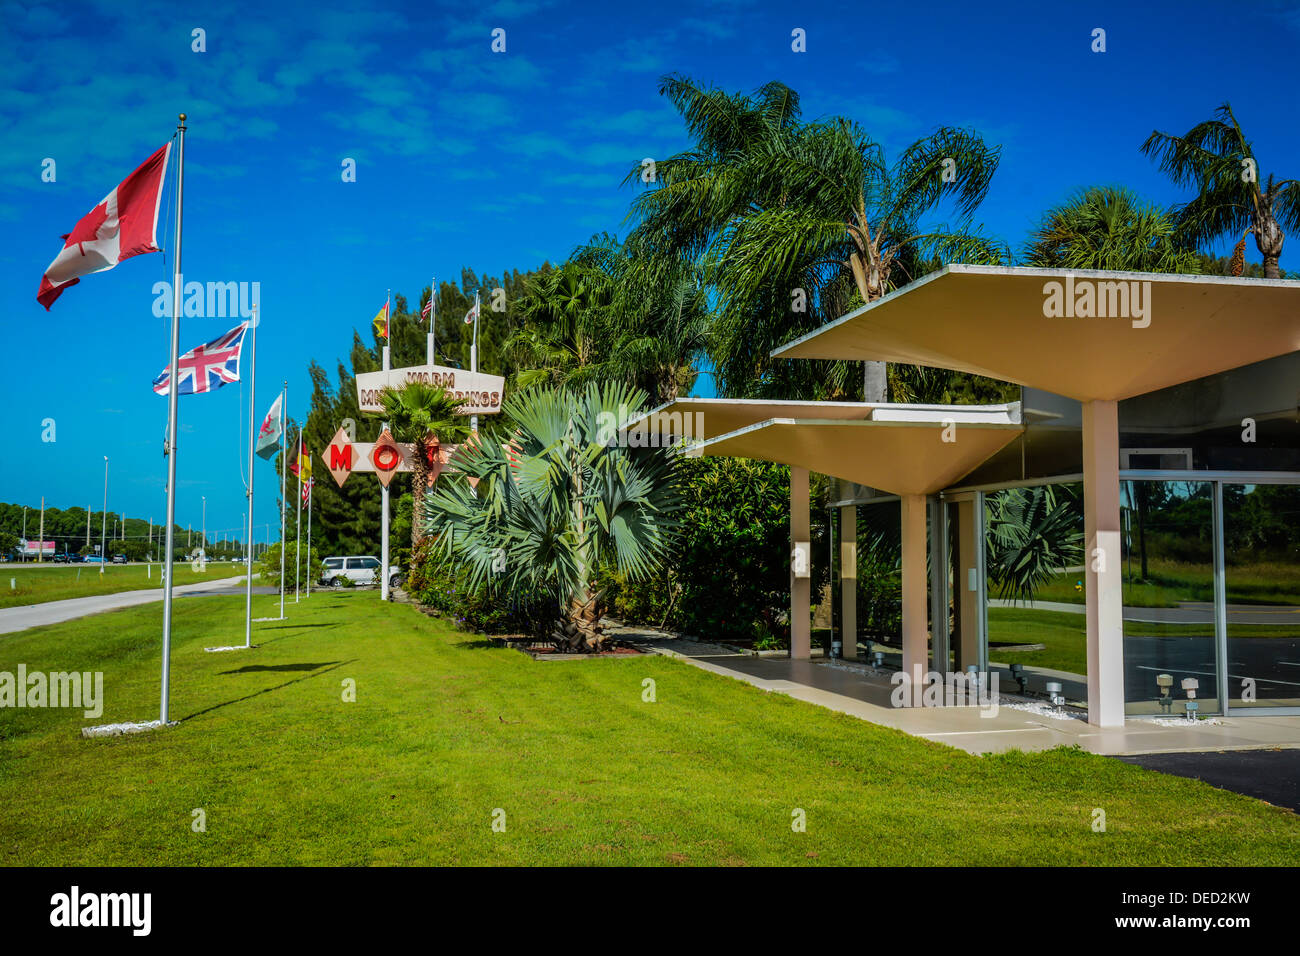 Historic Mid Century Motel designed by Victor A. Lundy, Warm Mineral Springs, FL Stock Photo